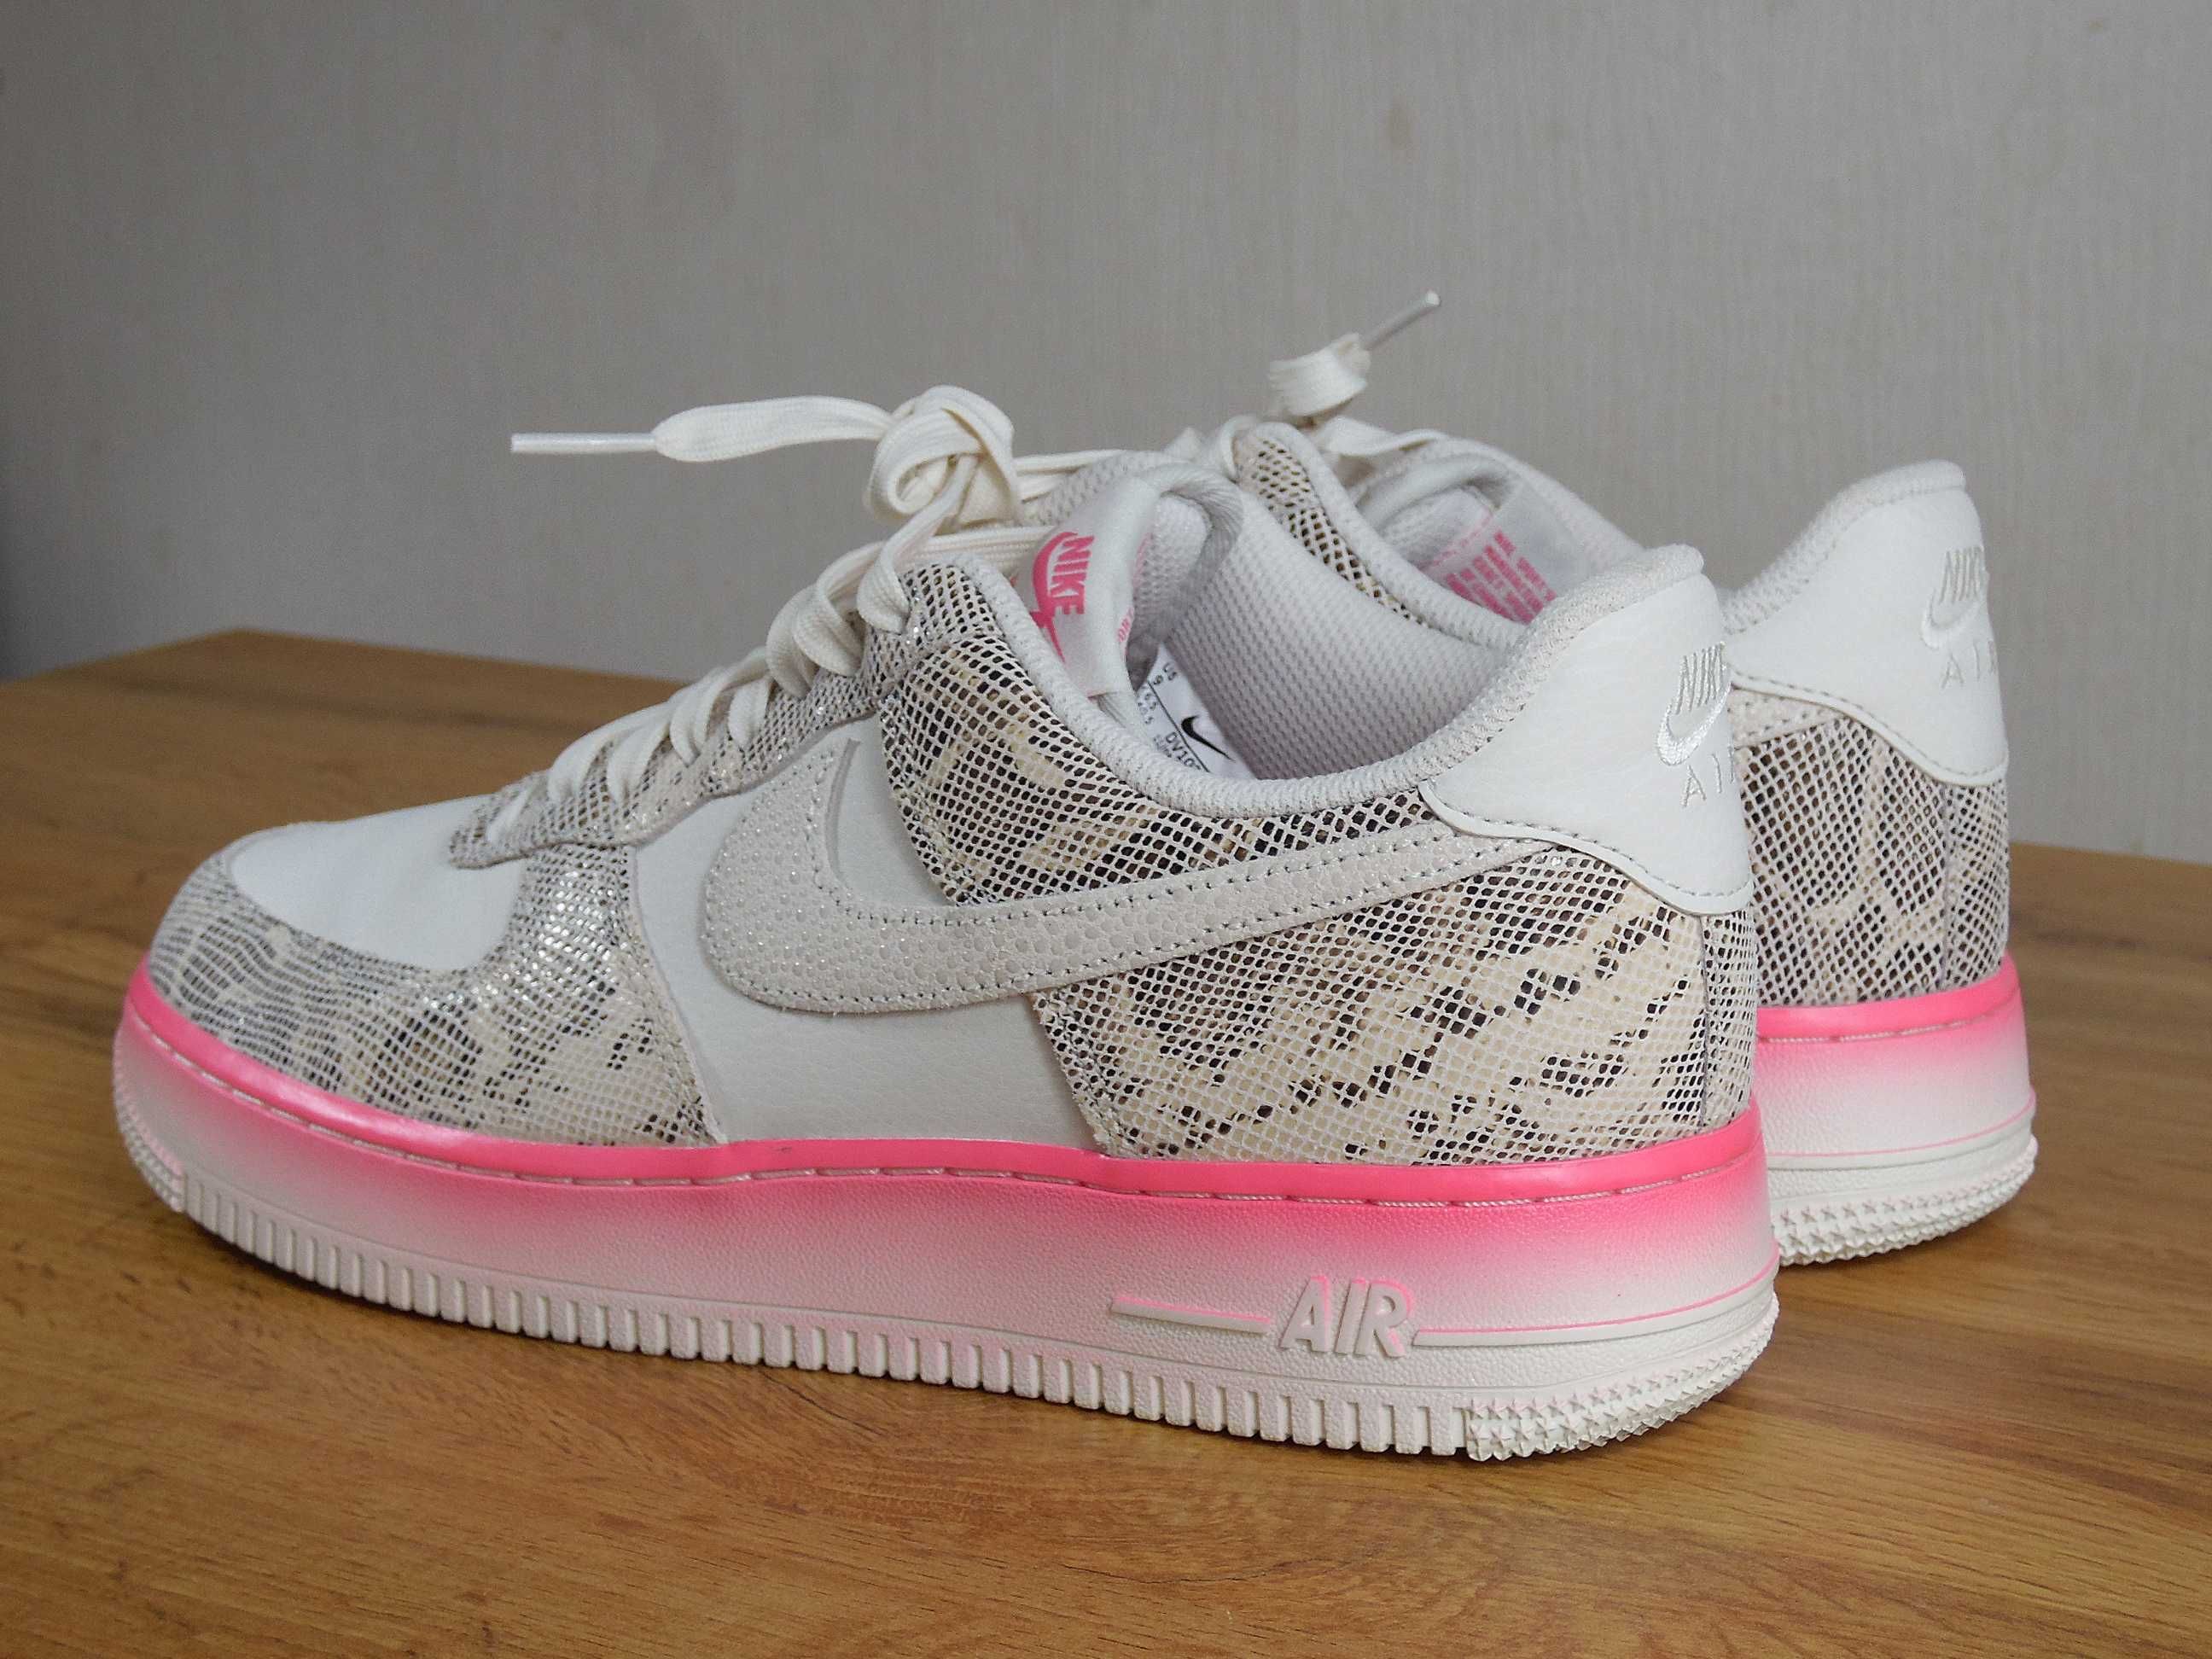 Nike Air Force 1 Low "Our Force 1" Snakeskin - 40,5 номер Оригинални!